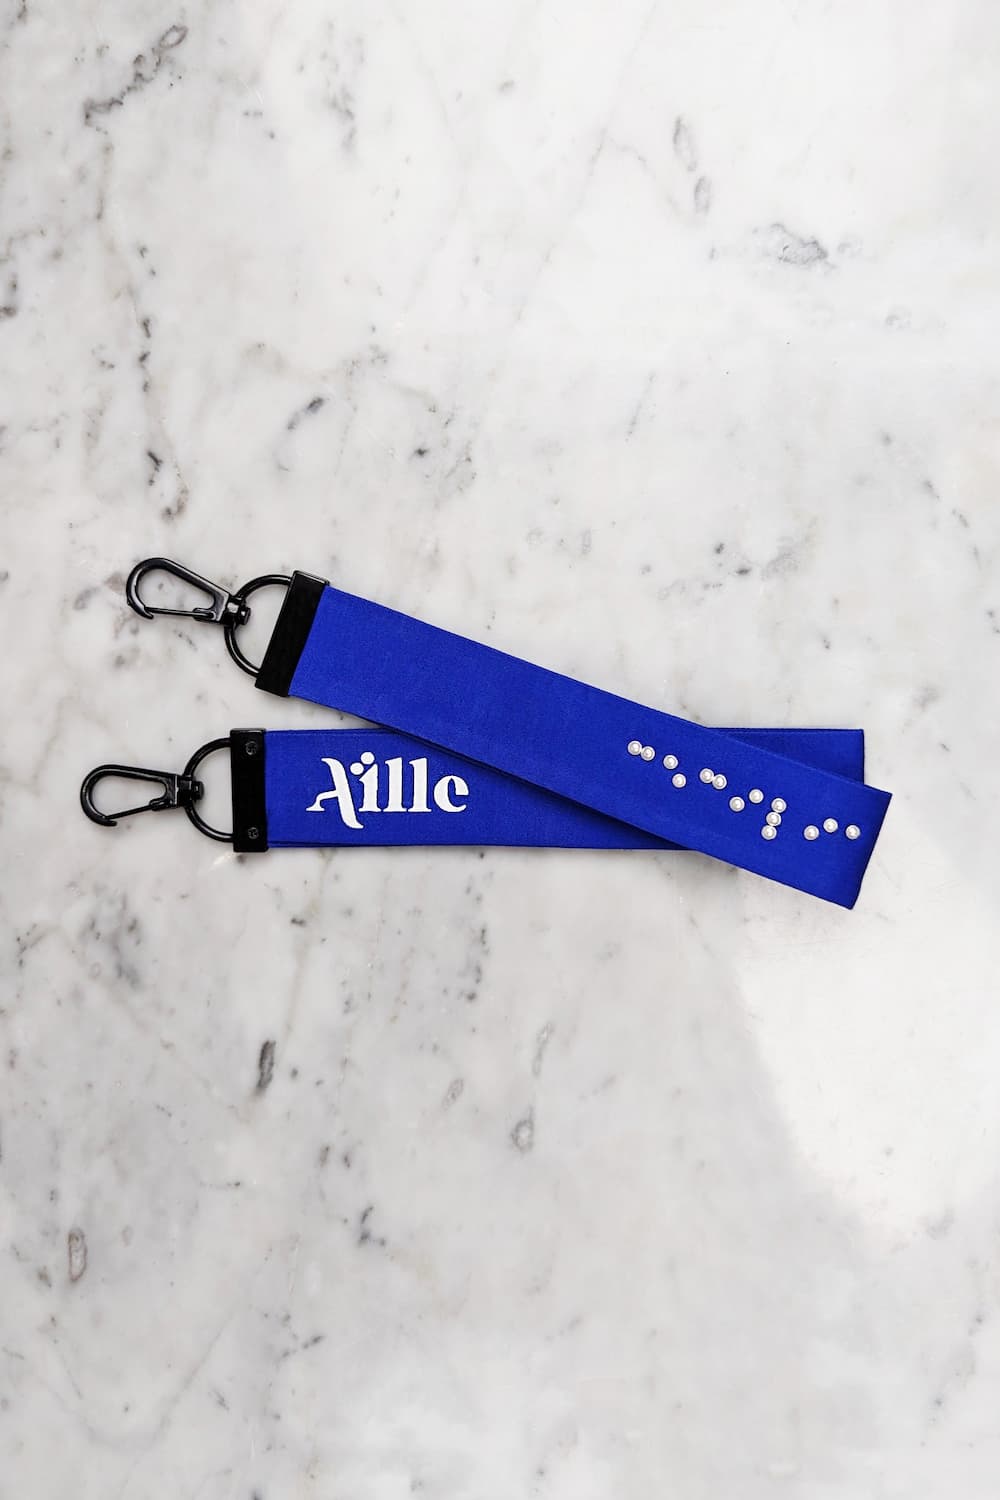 Royal blue keychain with white braille on one side and a white screen printed Aille Design logo on the other side.